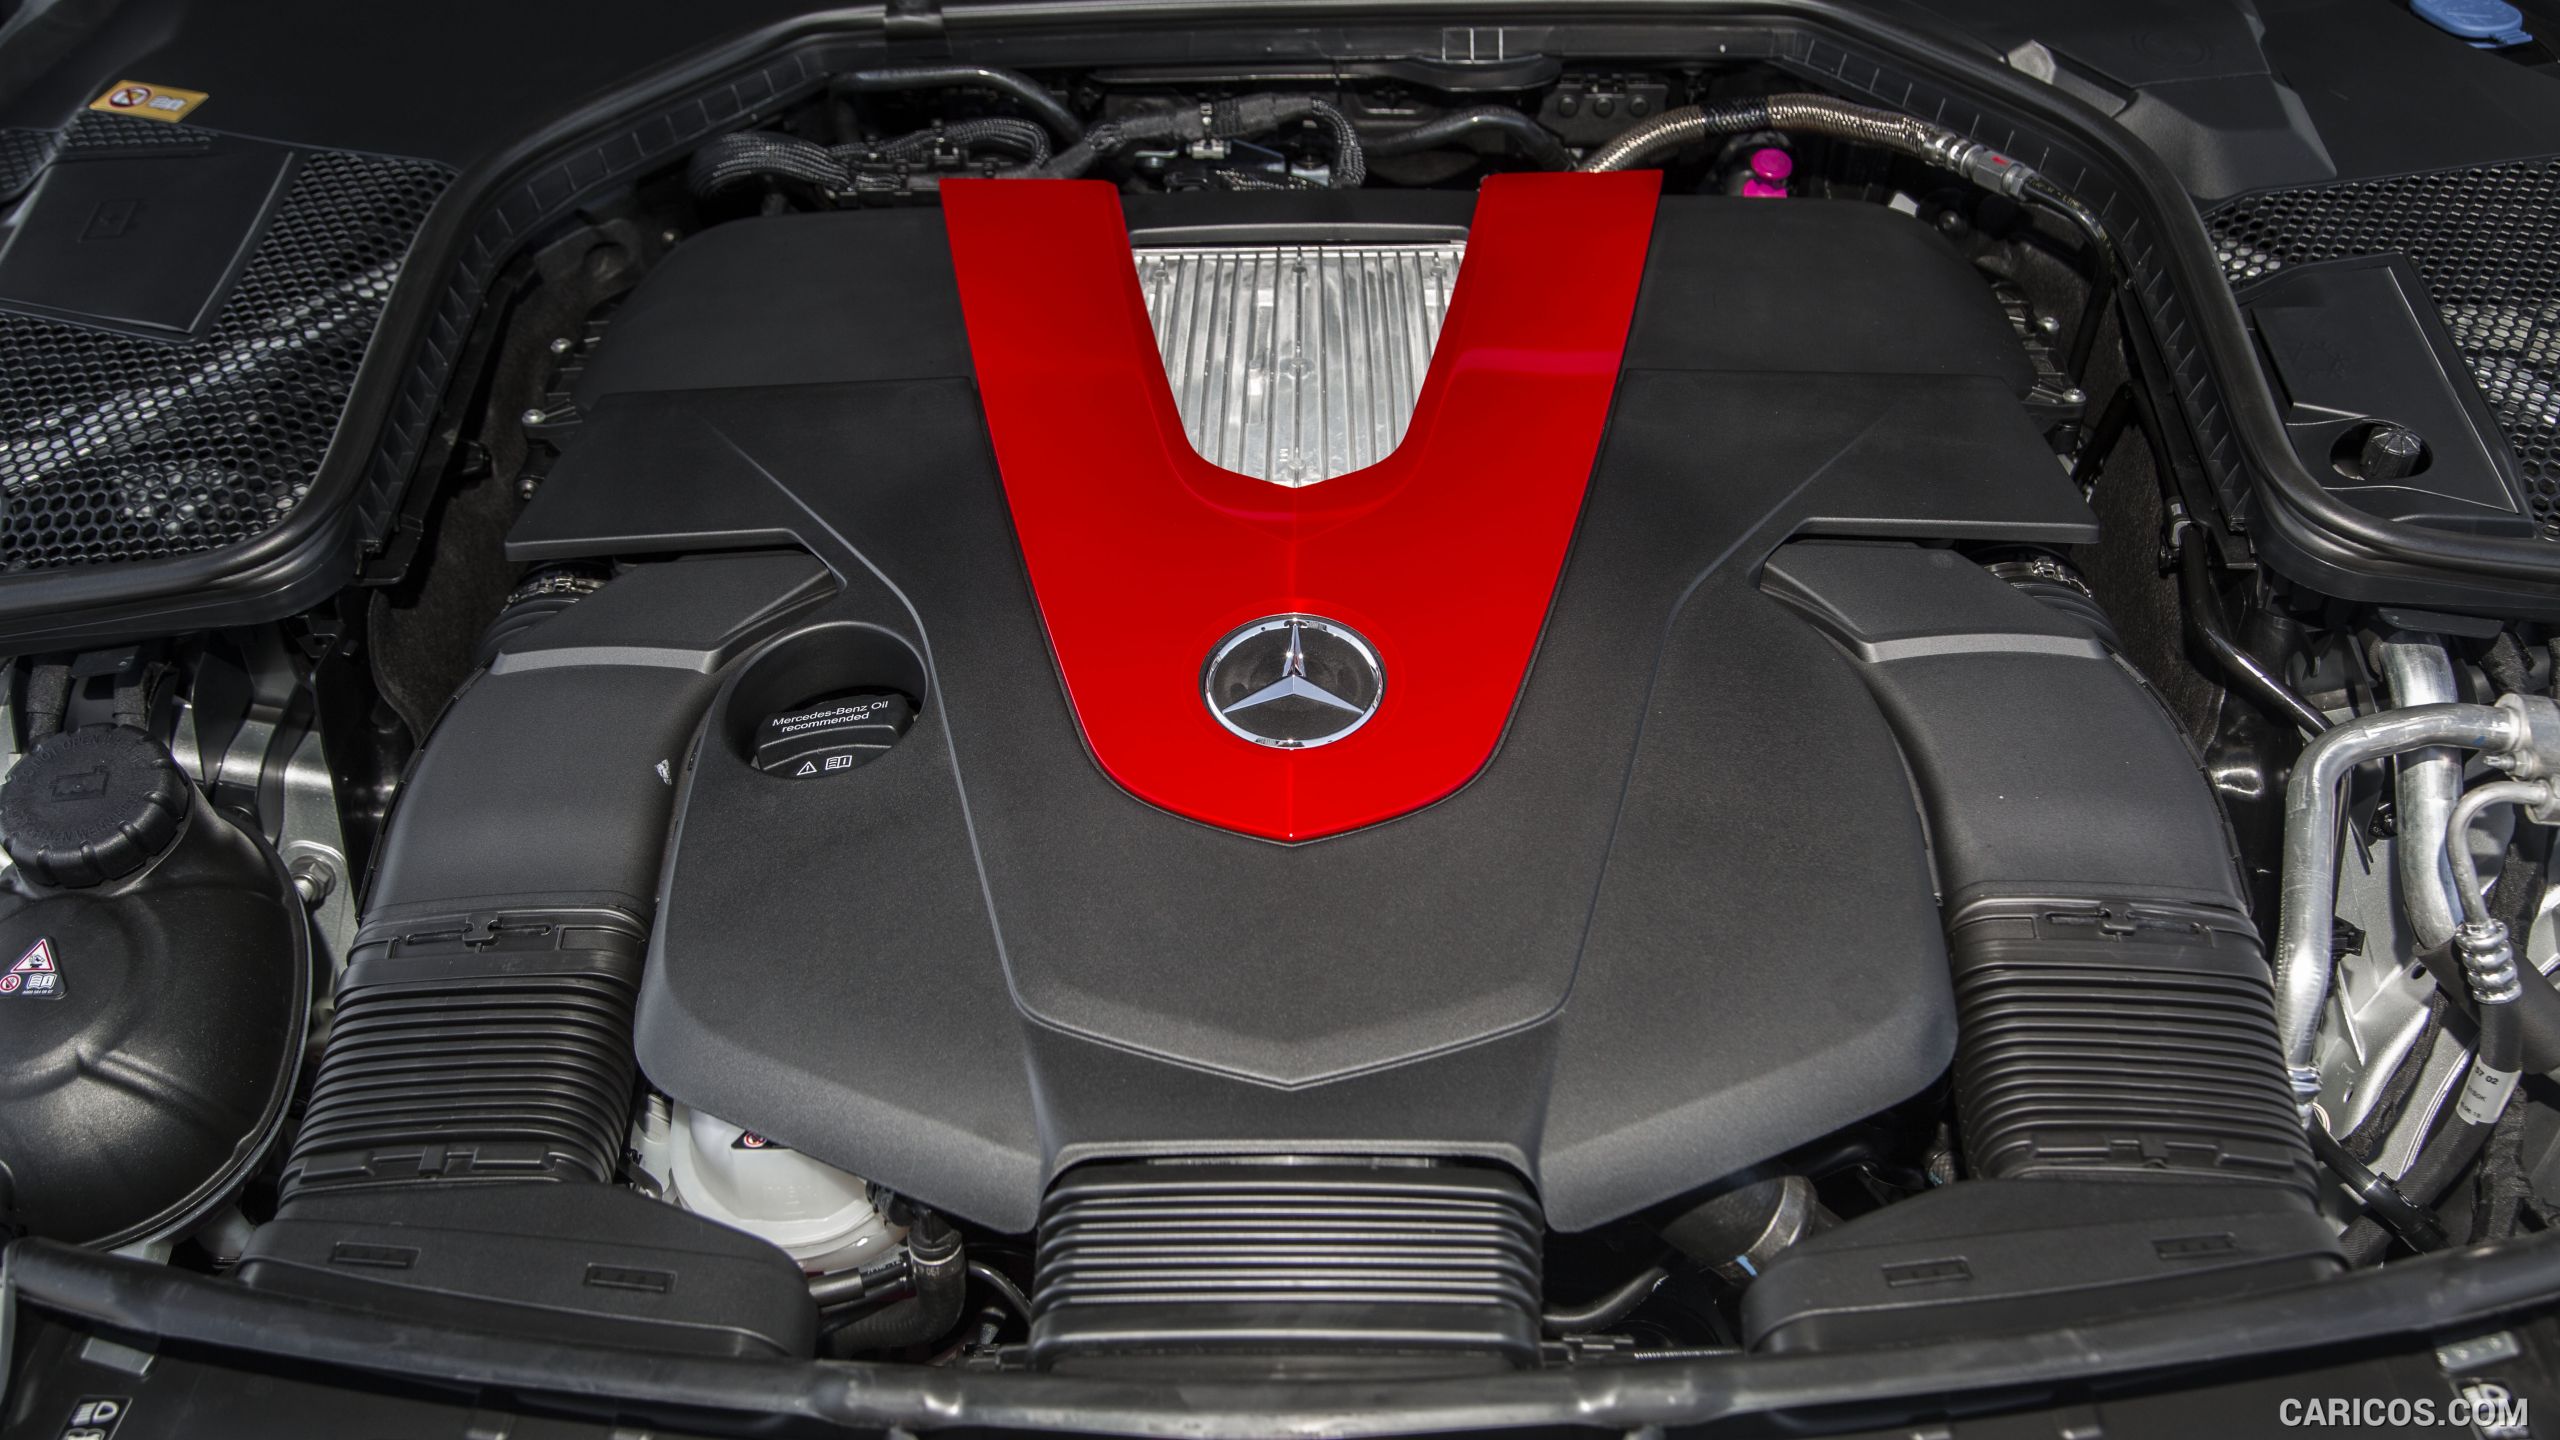 2016 Mercedes-Benz C450 AMG 4MATIC - Engine, #18 of 122